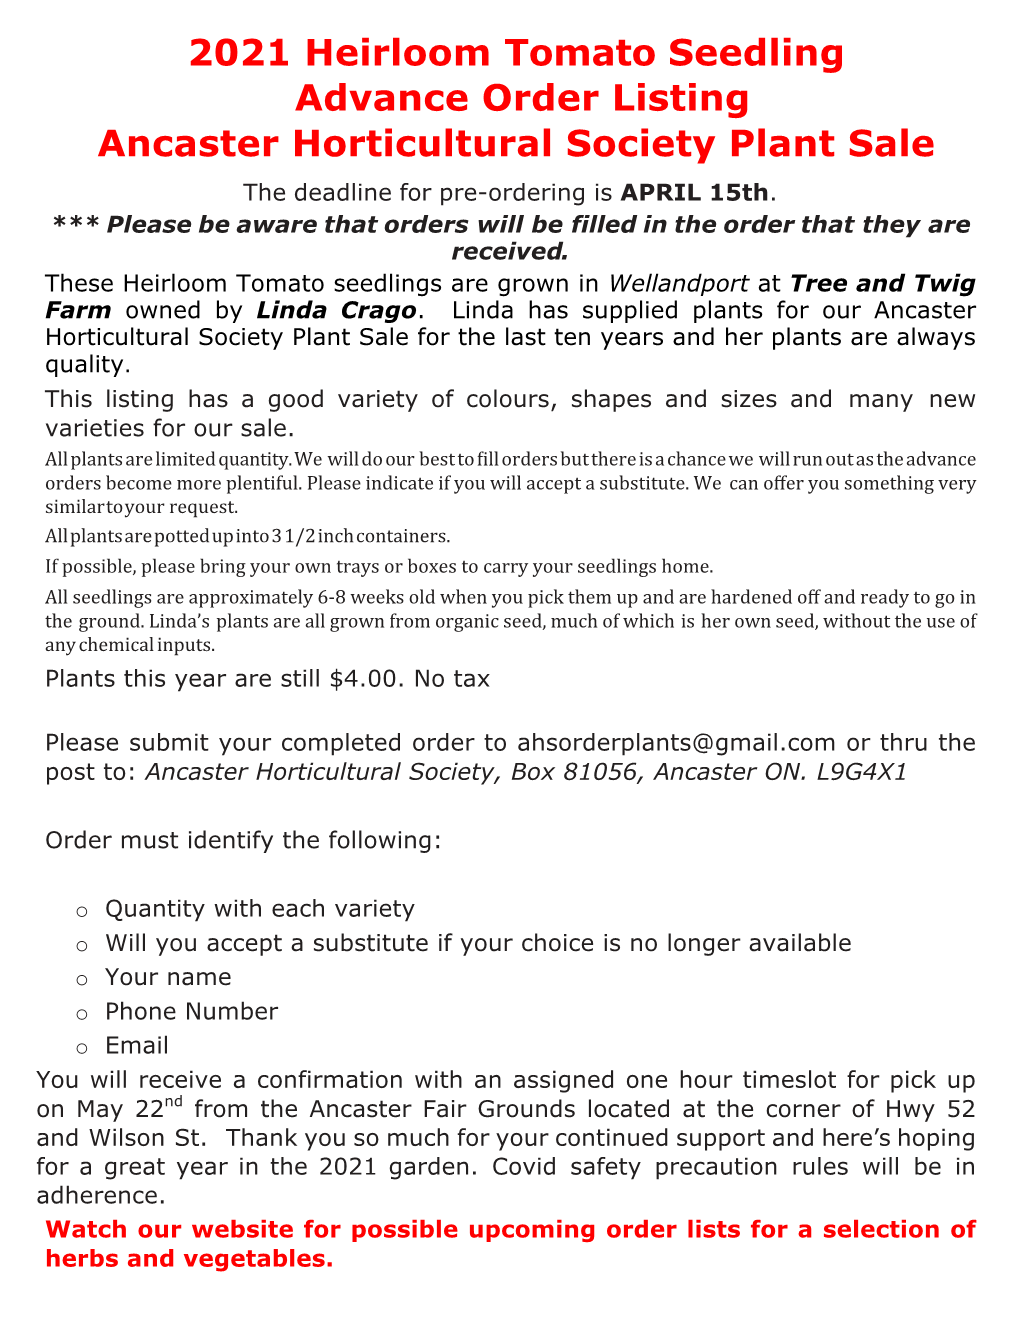 2021 Heirloom Tomato Seedling Advance Order Listing Ancaster Horticultural Society Plant Sale the Deadline for Pre-Ordering Is APRIL 15Th